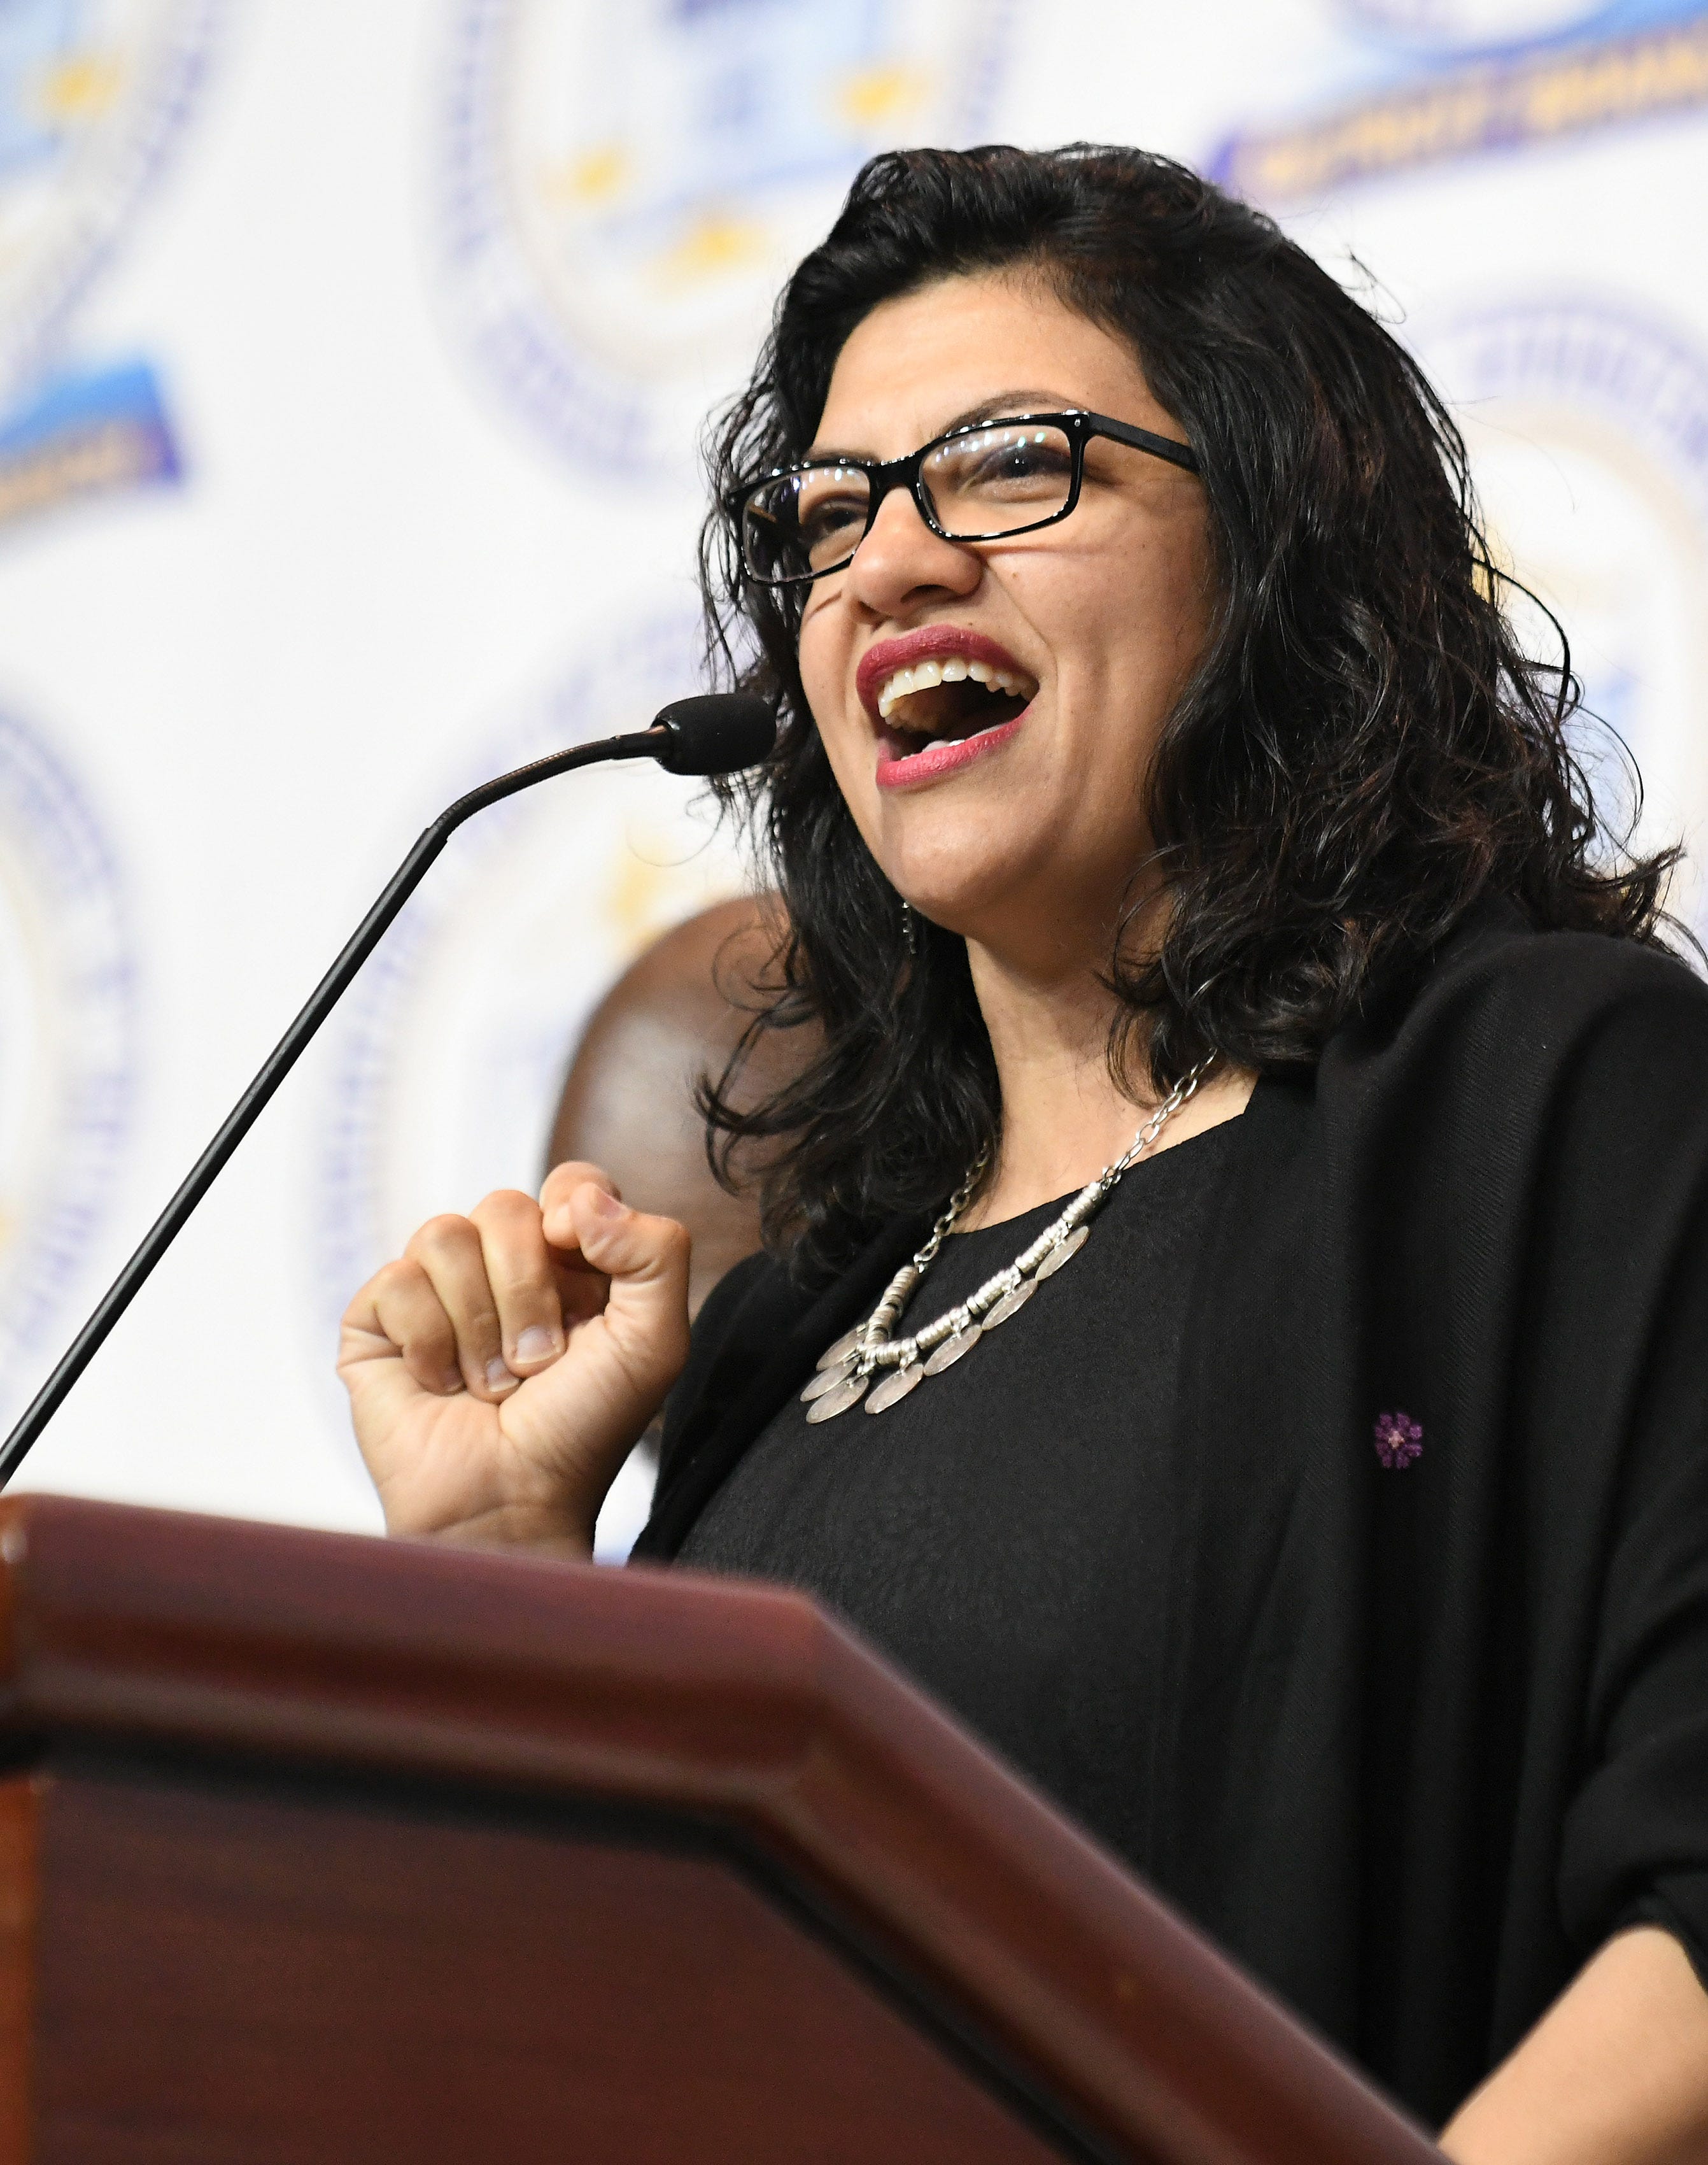 U.S. Rep. Rashida Tlaib is under attack for comments she made during a Yahoo News podcast last week.